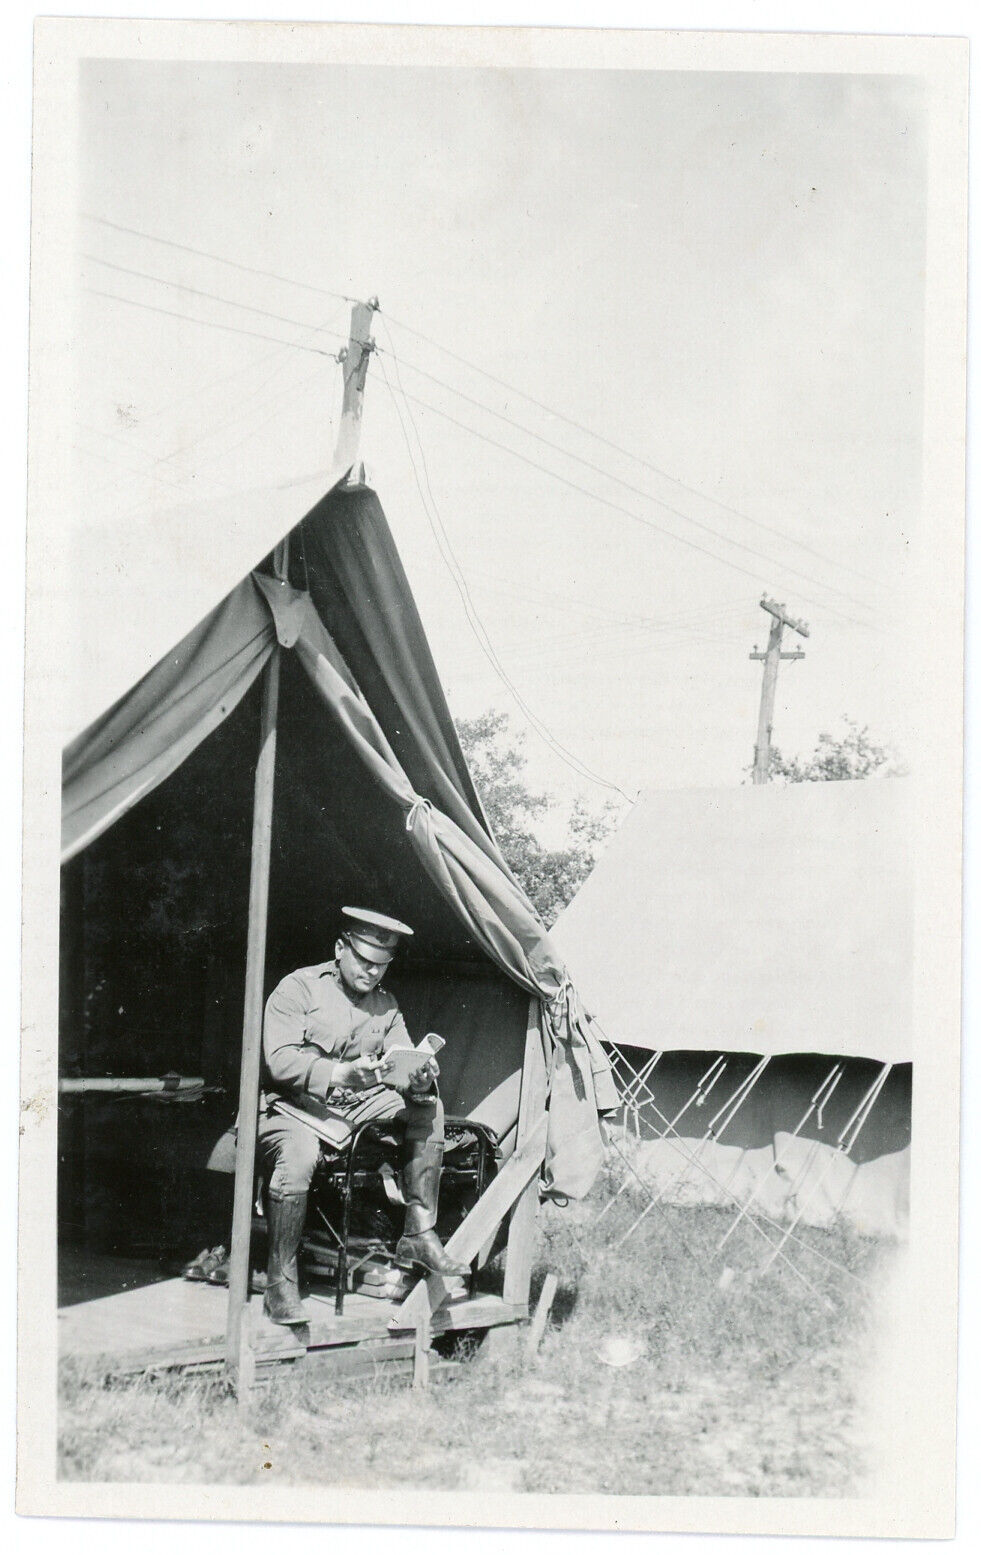 Soldier in Tent on Bed Reading Book Magazine Vintage Photo Officer Uniform 71